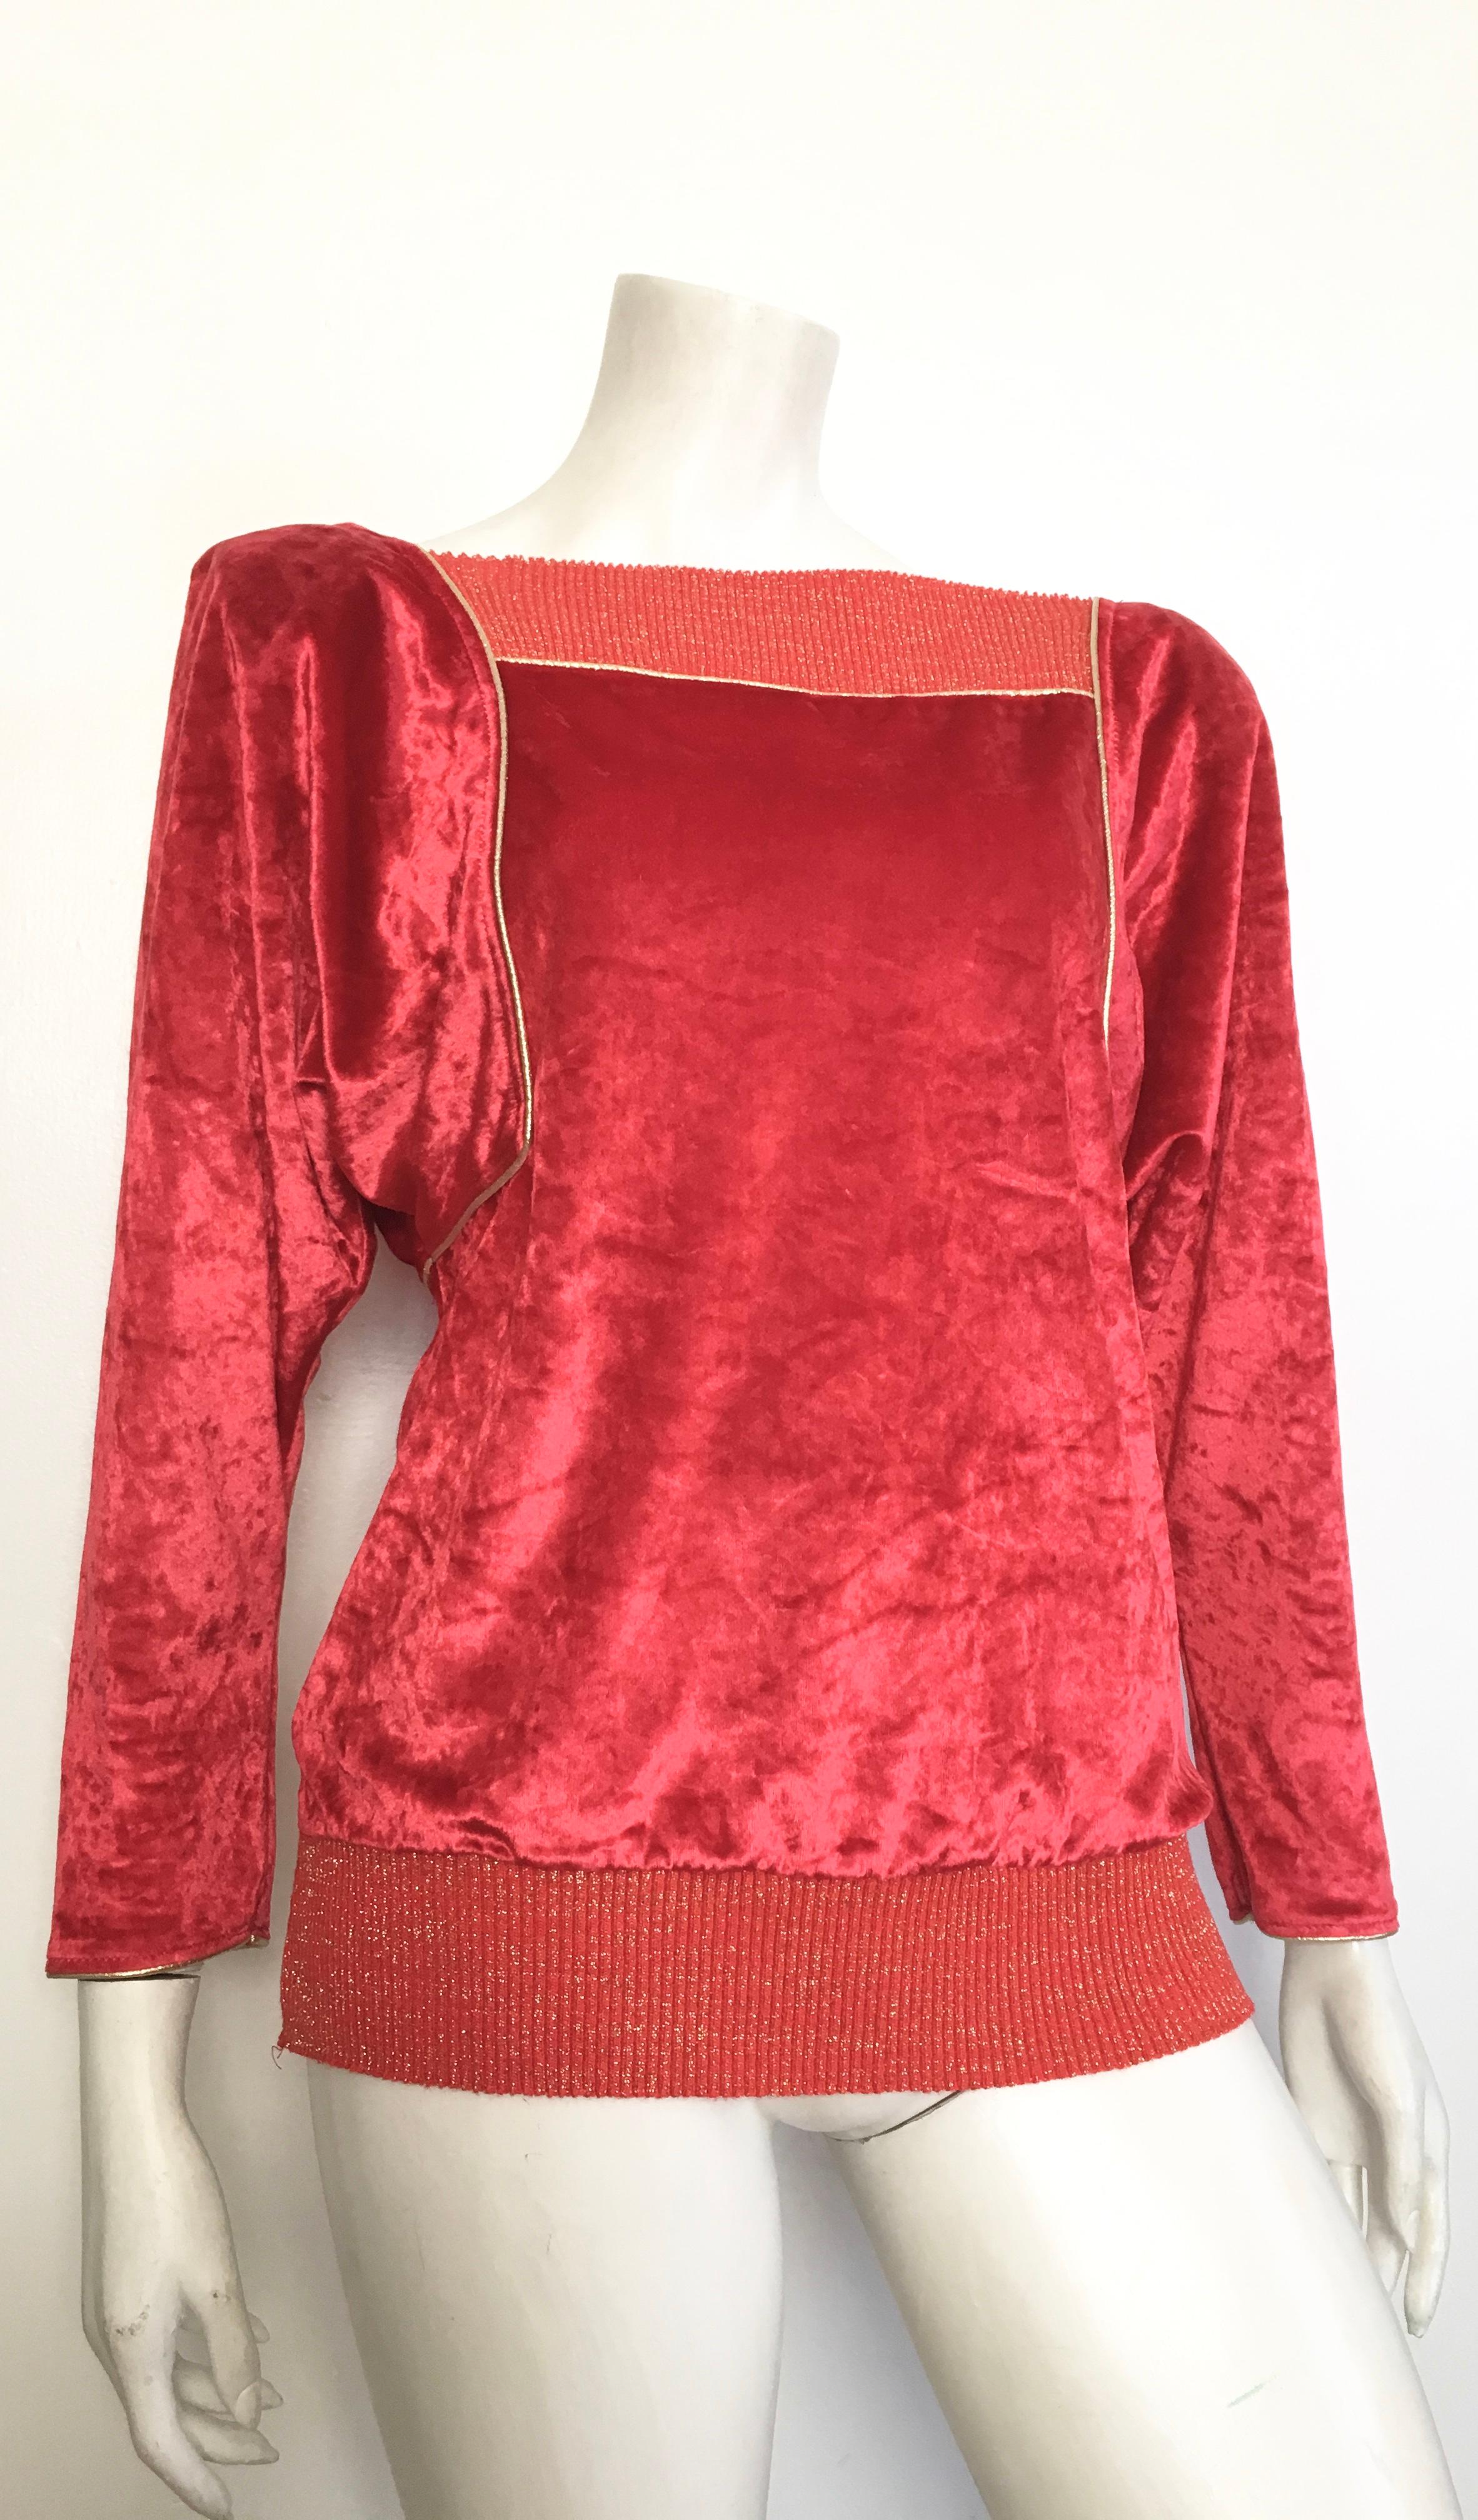 Oscar de la Renta for Swirl 1980s red crushed velvet with gold piping and metallic thread on collar & waistband is labeled a P for petite size.  This gorgeous piece is modeled on Matilda the Mannequin, which wears a size 4, and Matilda looks